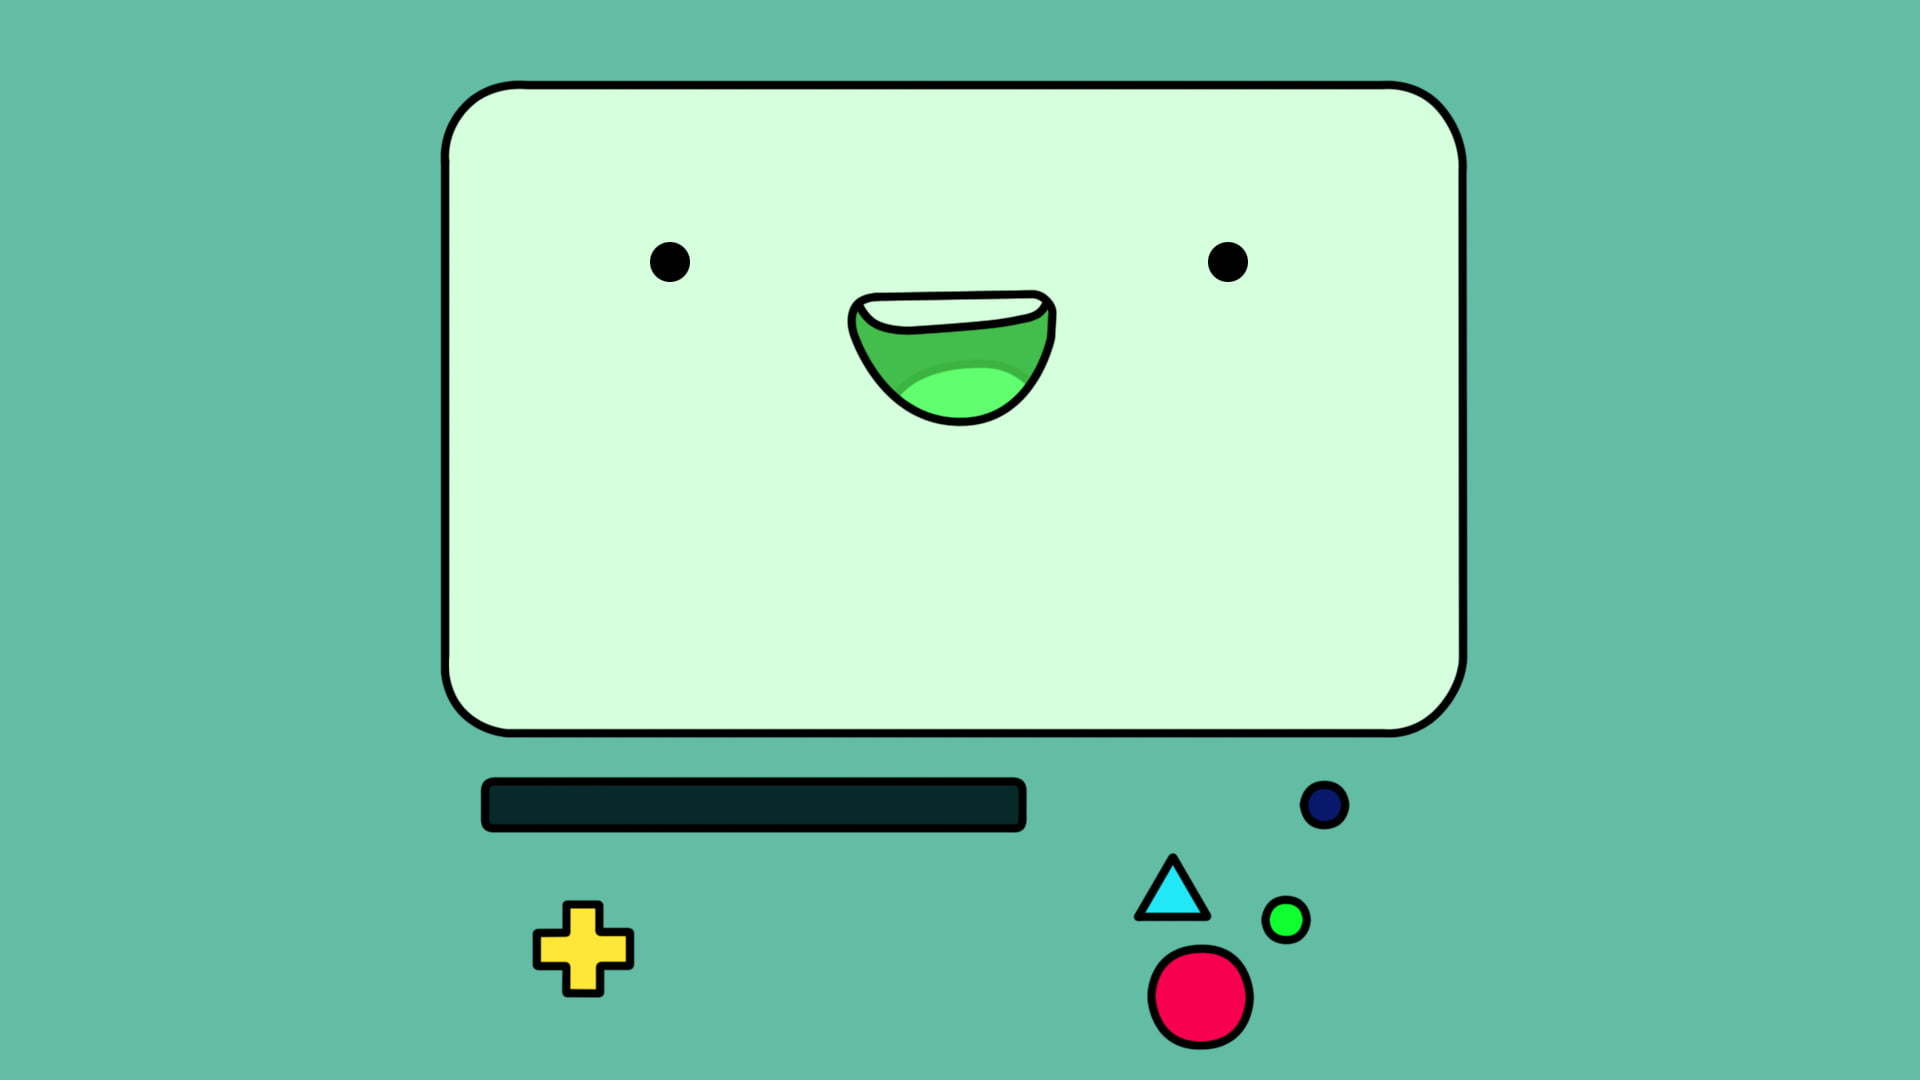 Beemo from Adventure Time wallpaper, BMO, technology, communication